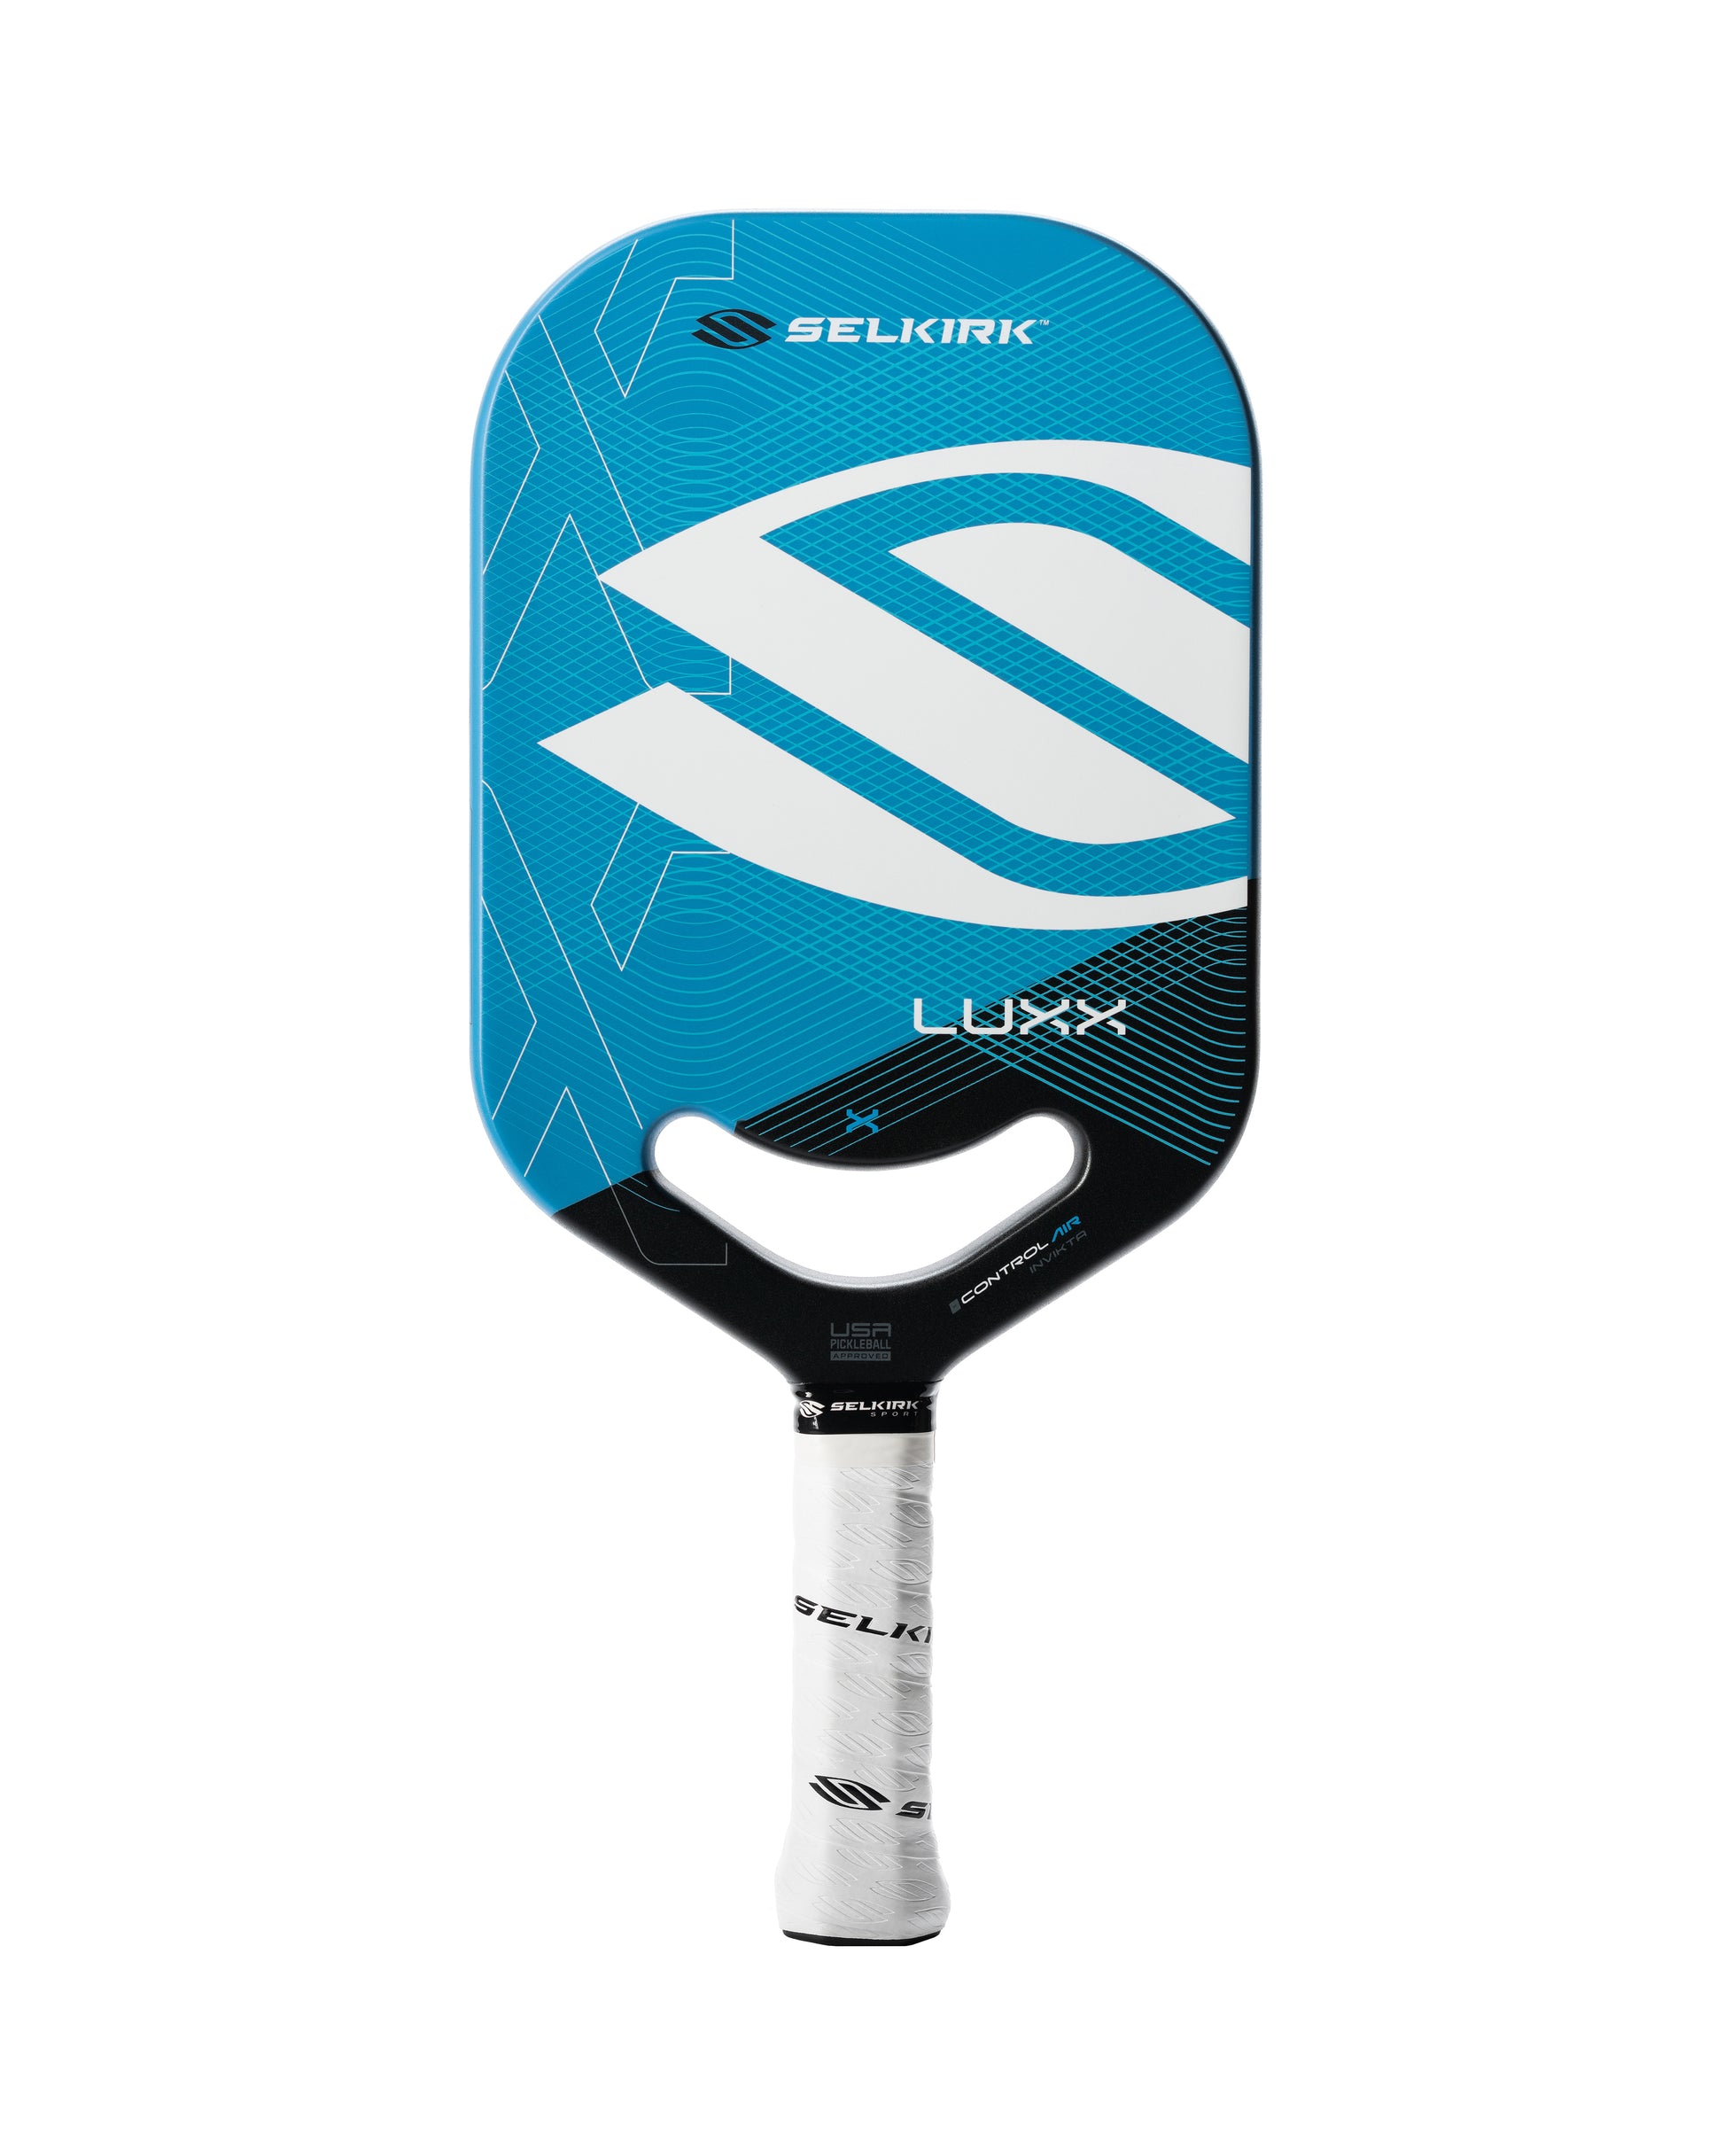 A Selkirk LUXX Control Air Invikta pickleball paddle for pickleball players.